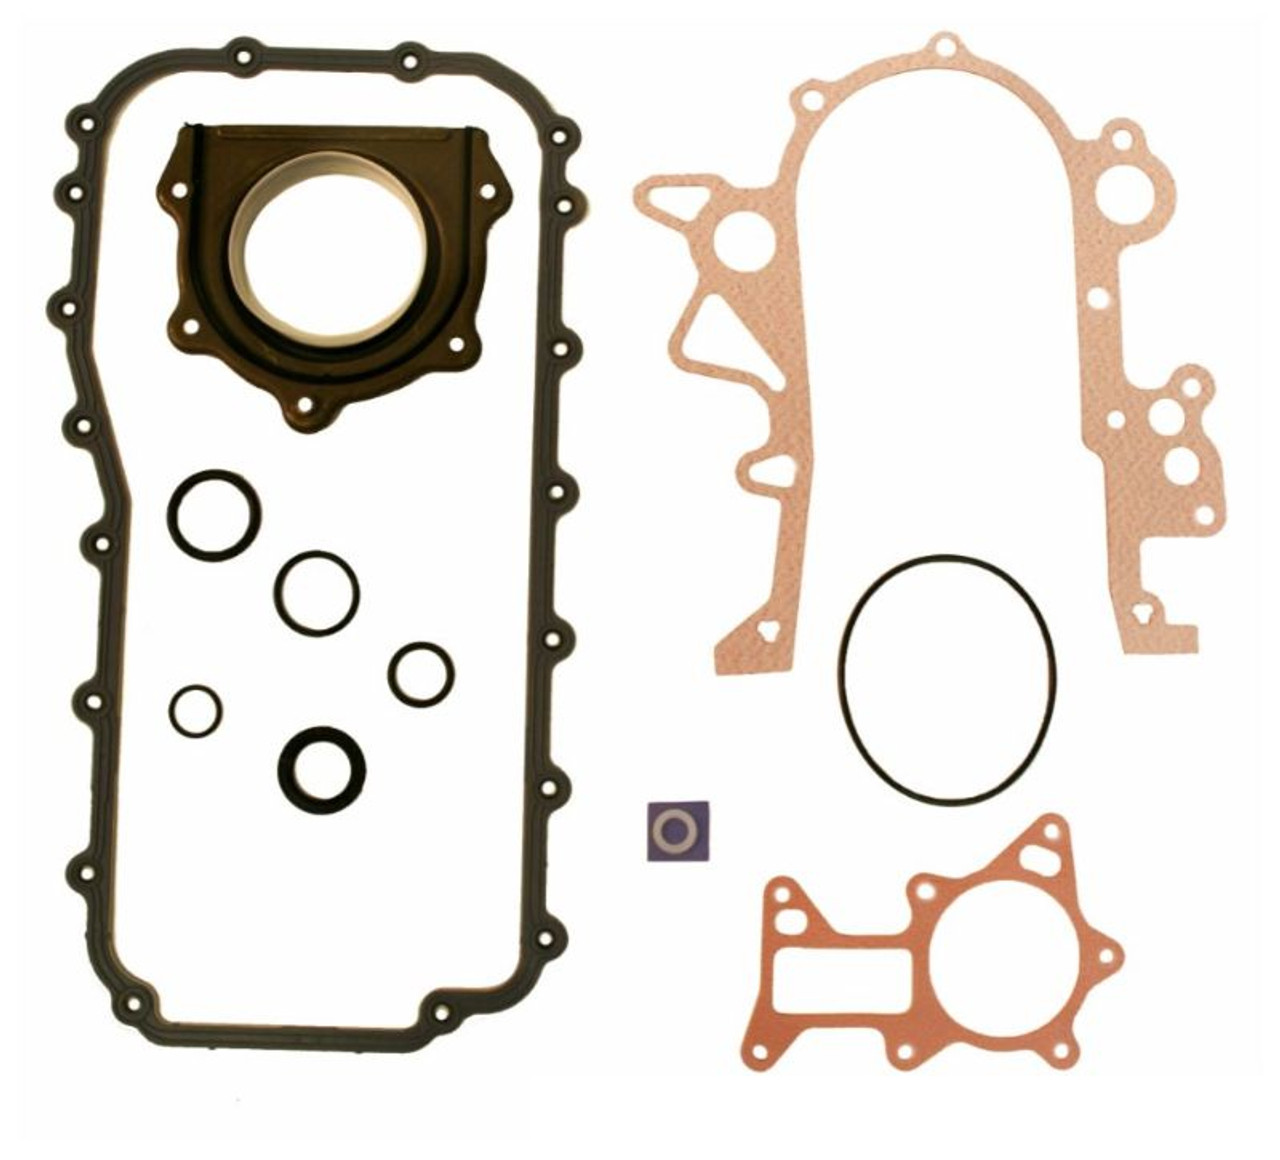 2009 Chrysler Town & Country 3.8L Engine Lower Gasket Set CR232CS-A -7